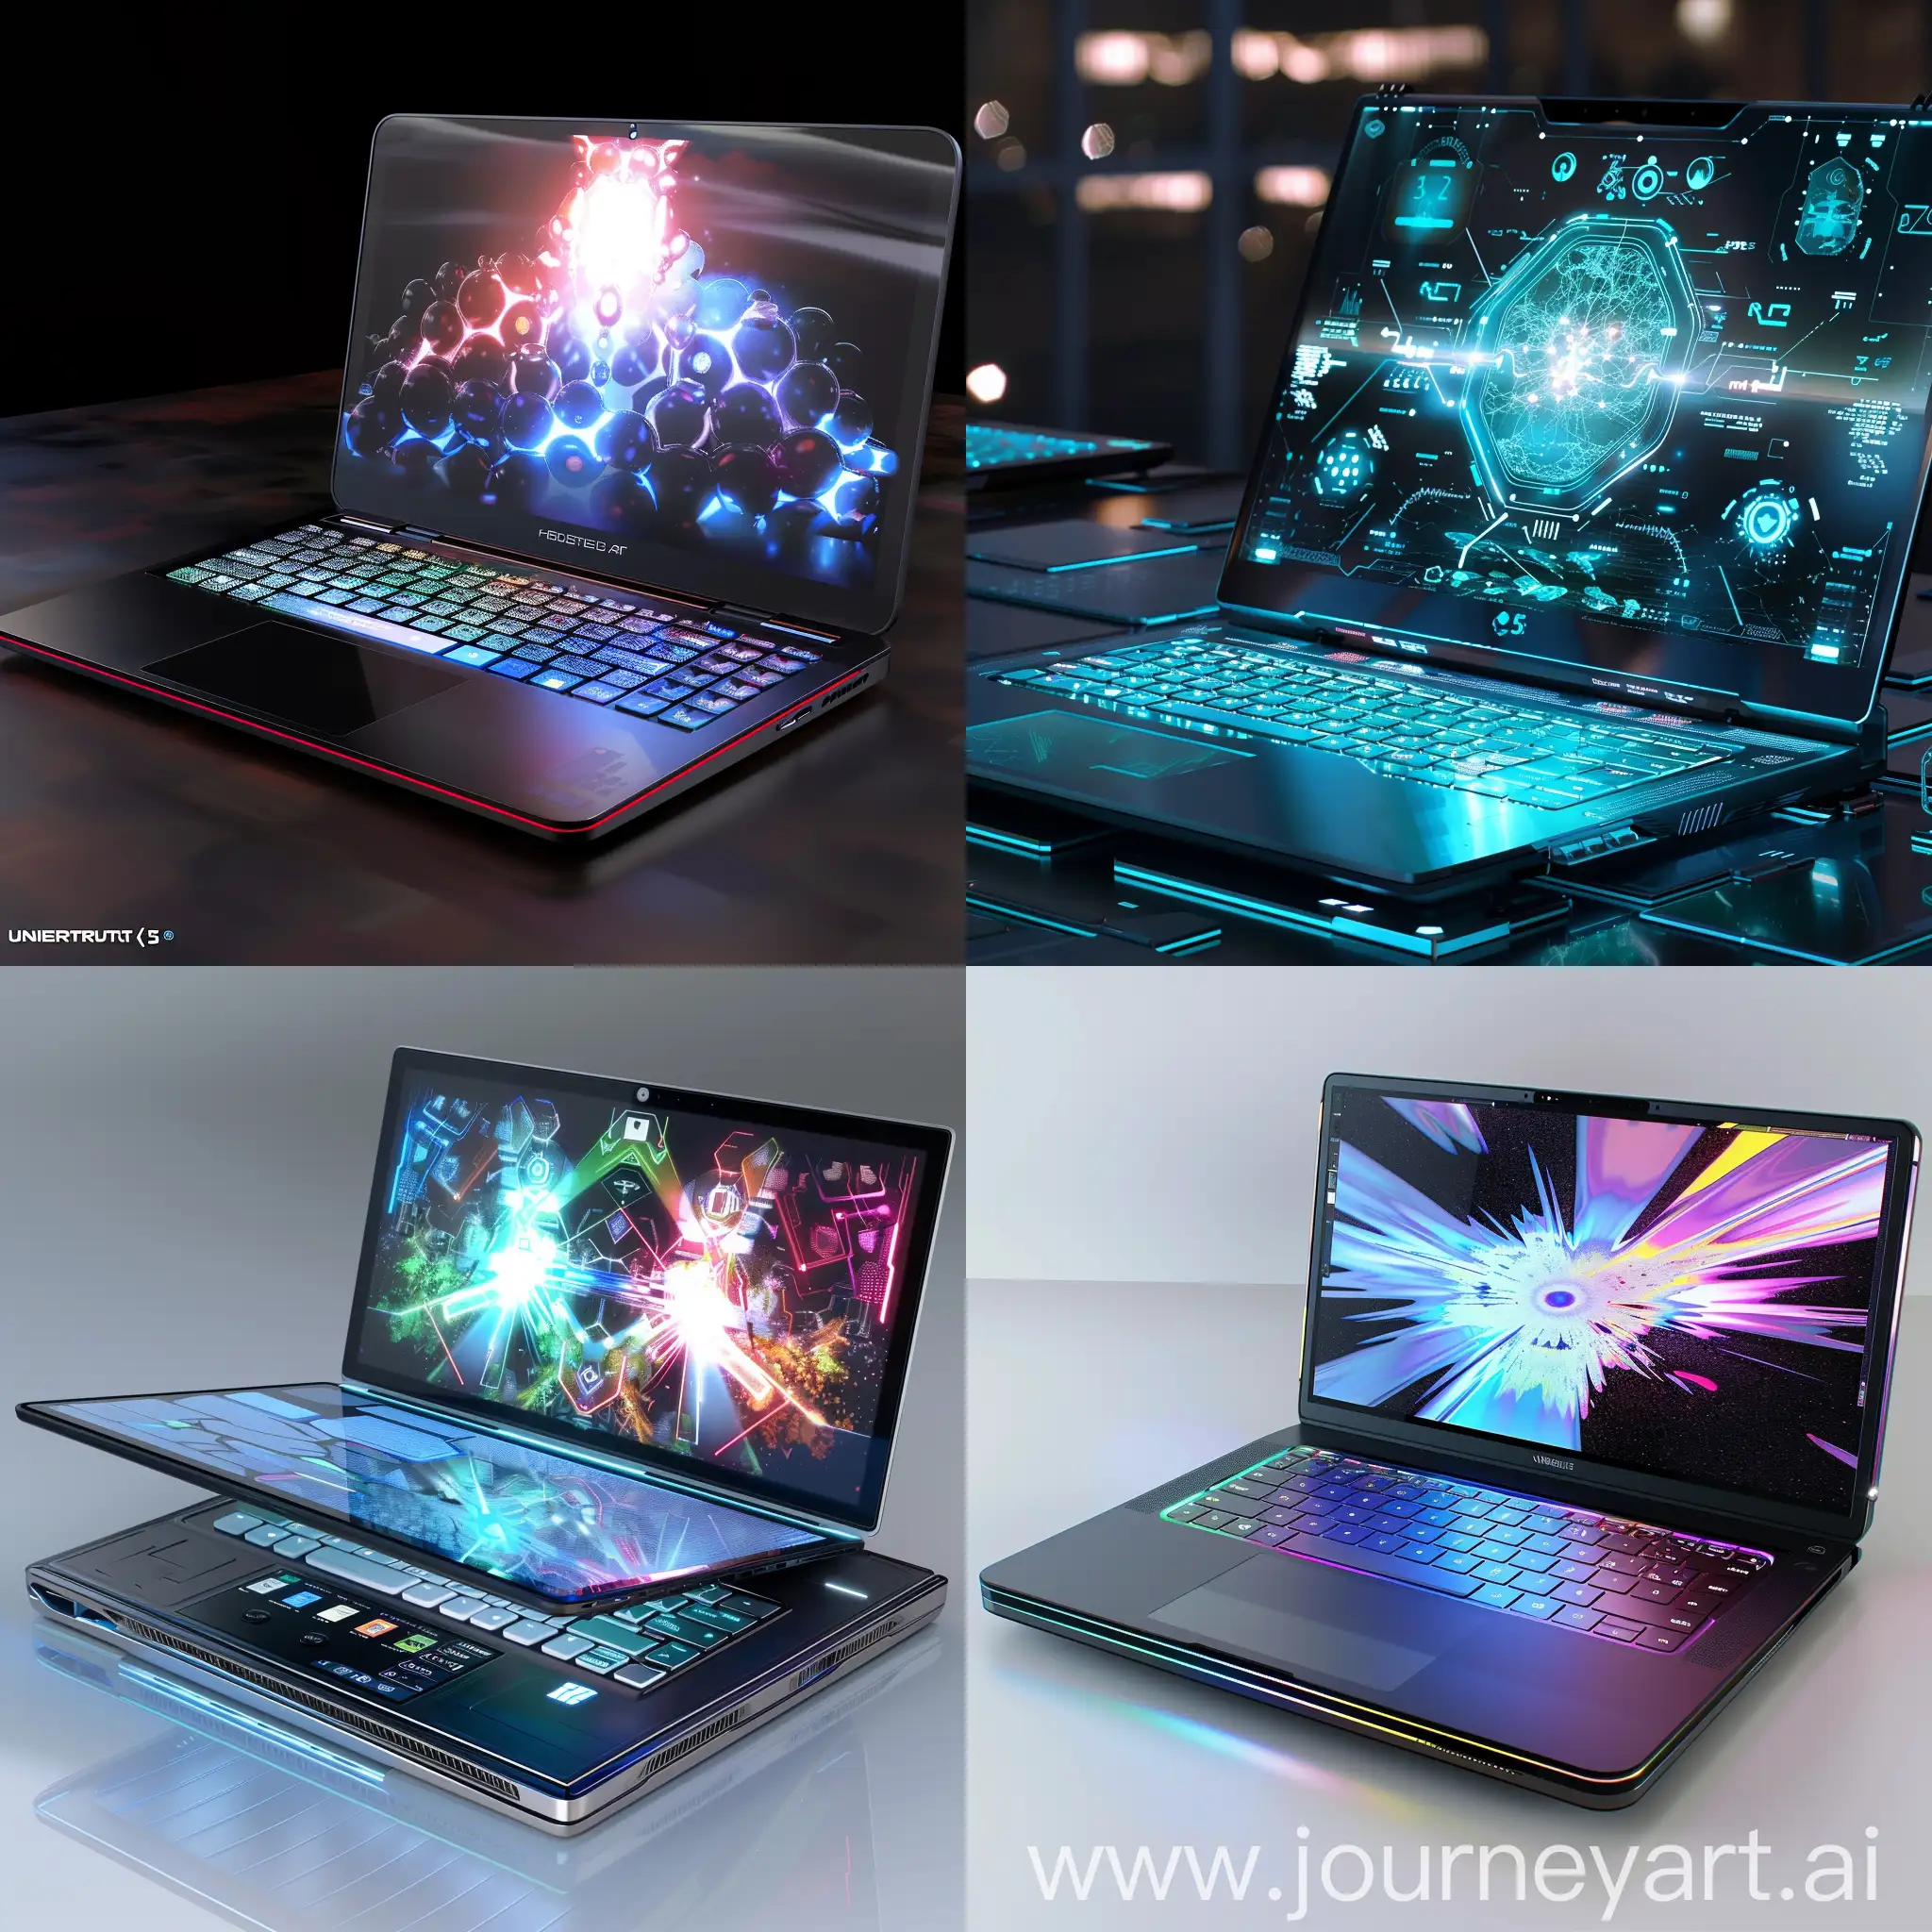 Futuristic-Laptop-with-Quantum-Processors-and-Holographic-Display